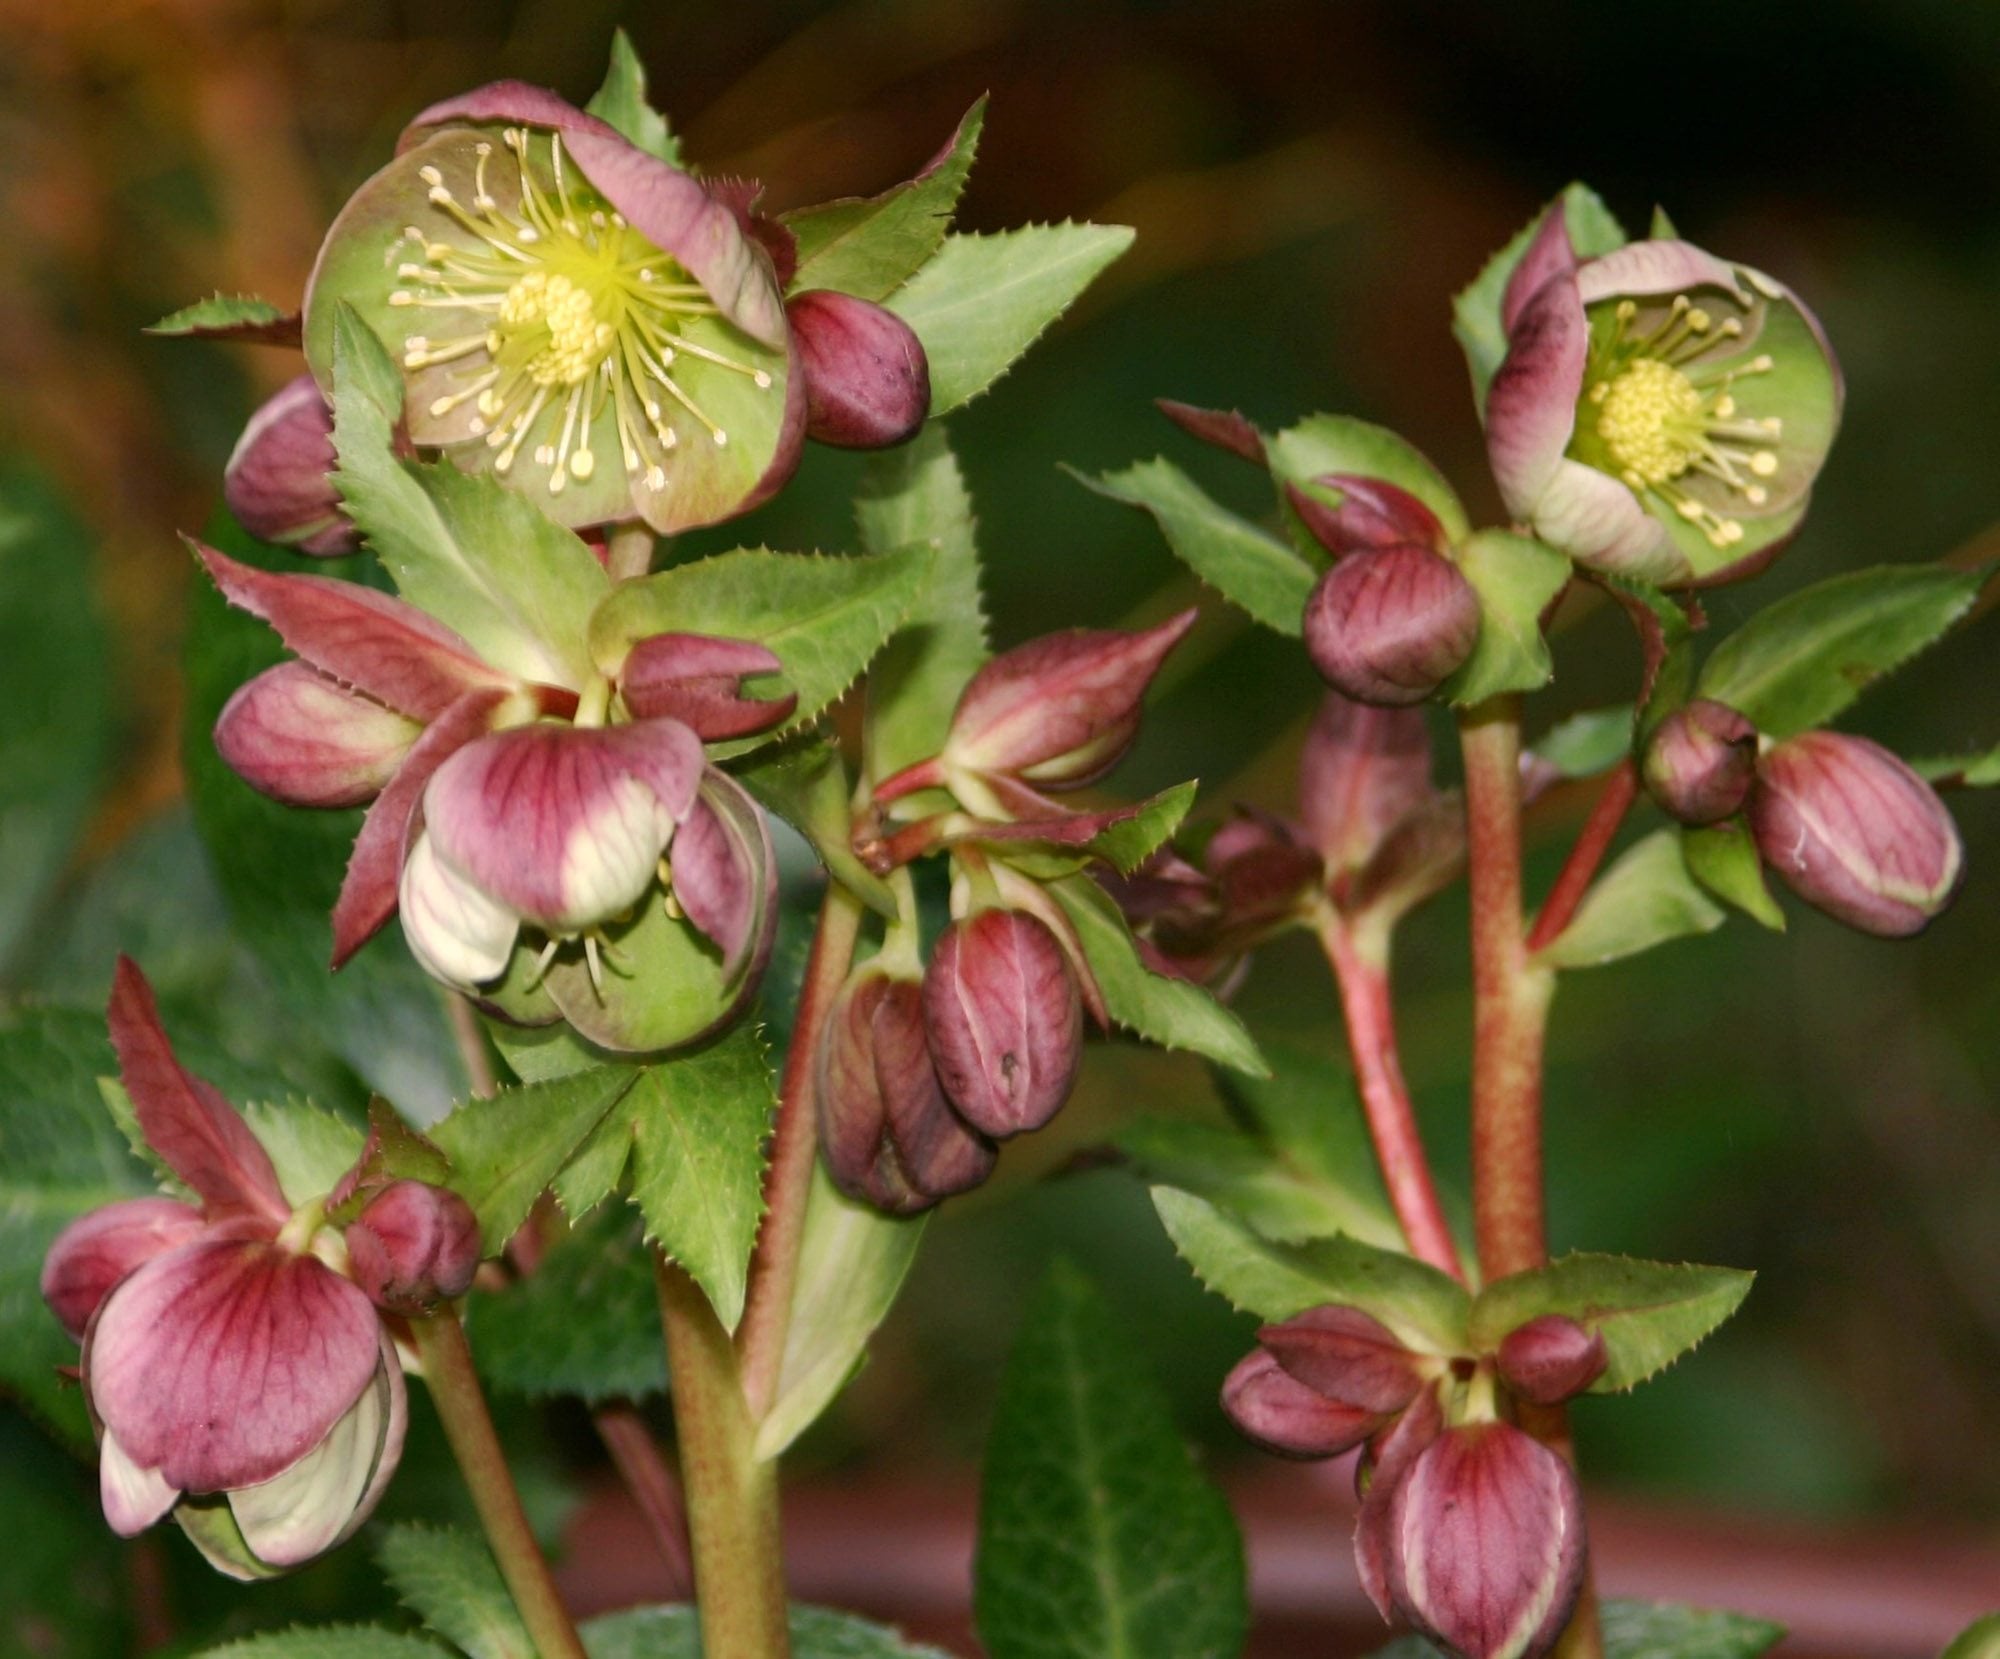 &quot;Hot Flash&quot; brings a month of nonstop blooming hellebores to a spectacular finale.